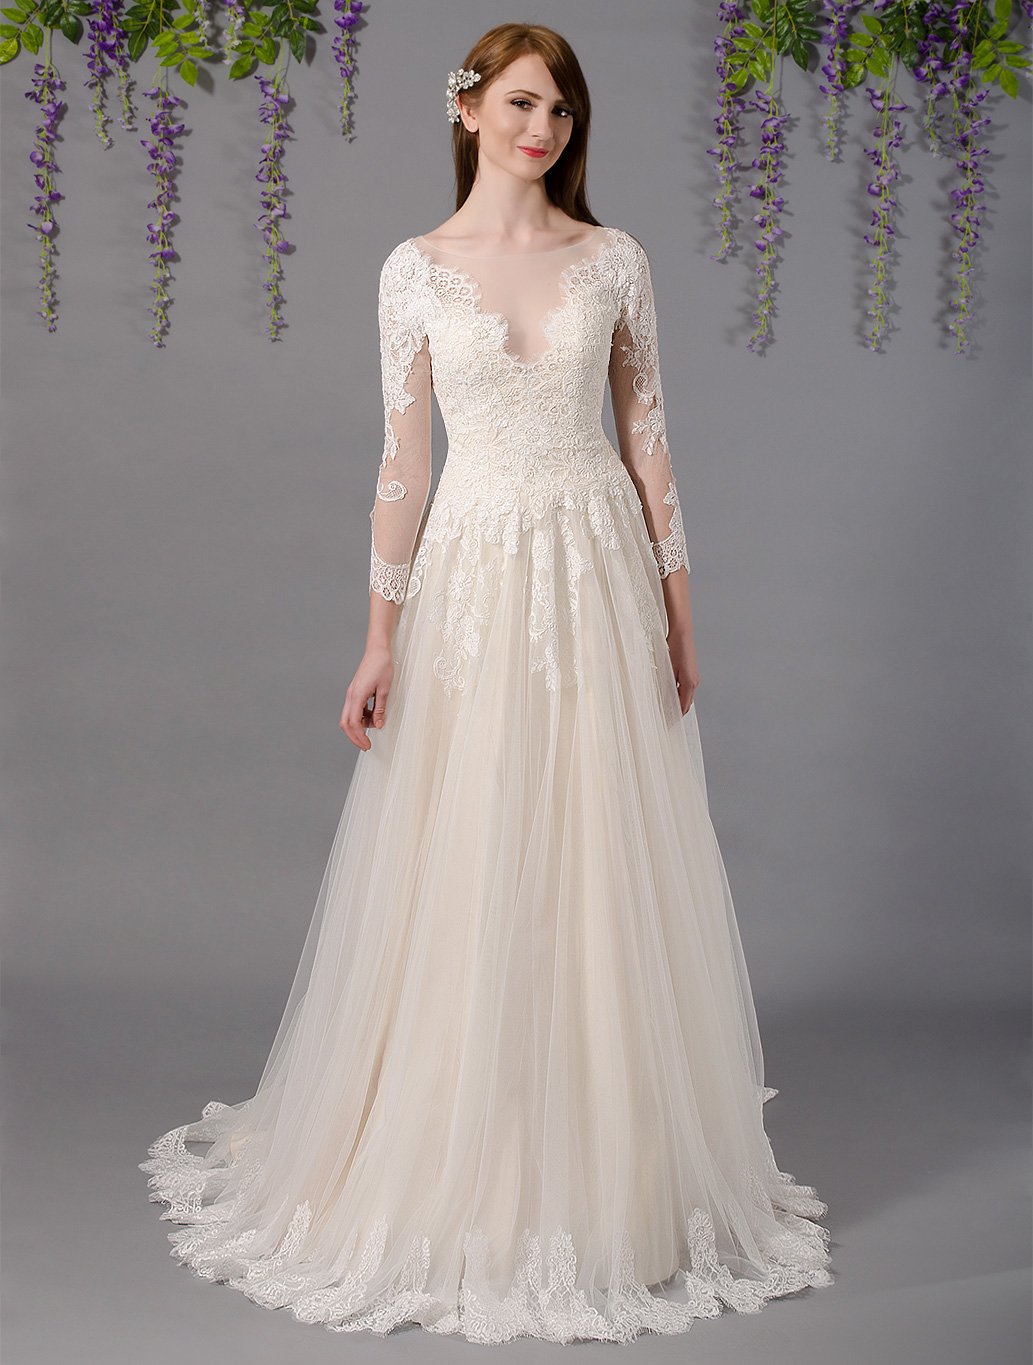 Long sleeve lace wedding dress with alencon lace 4031